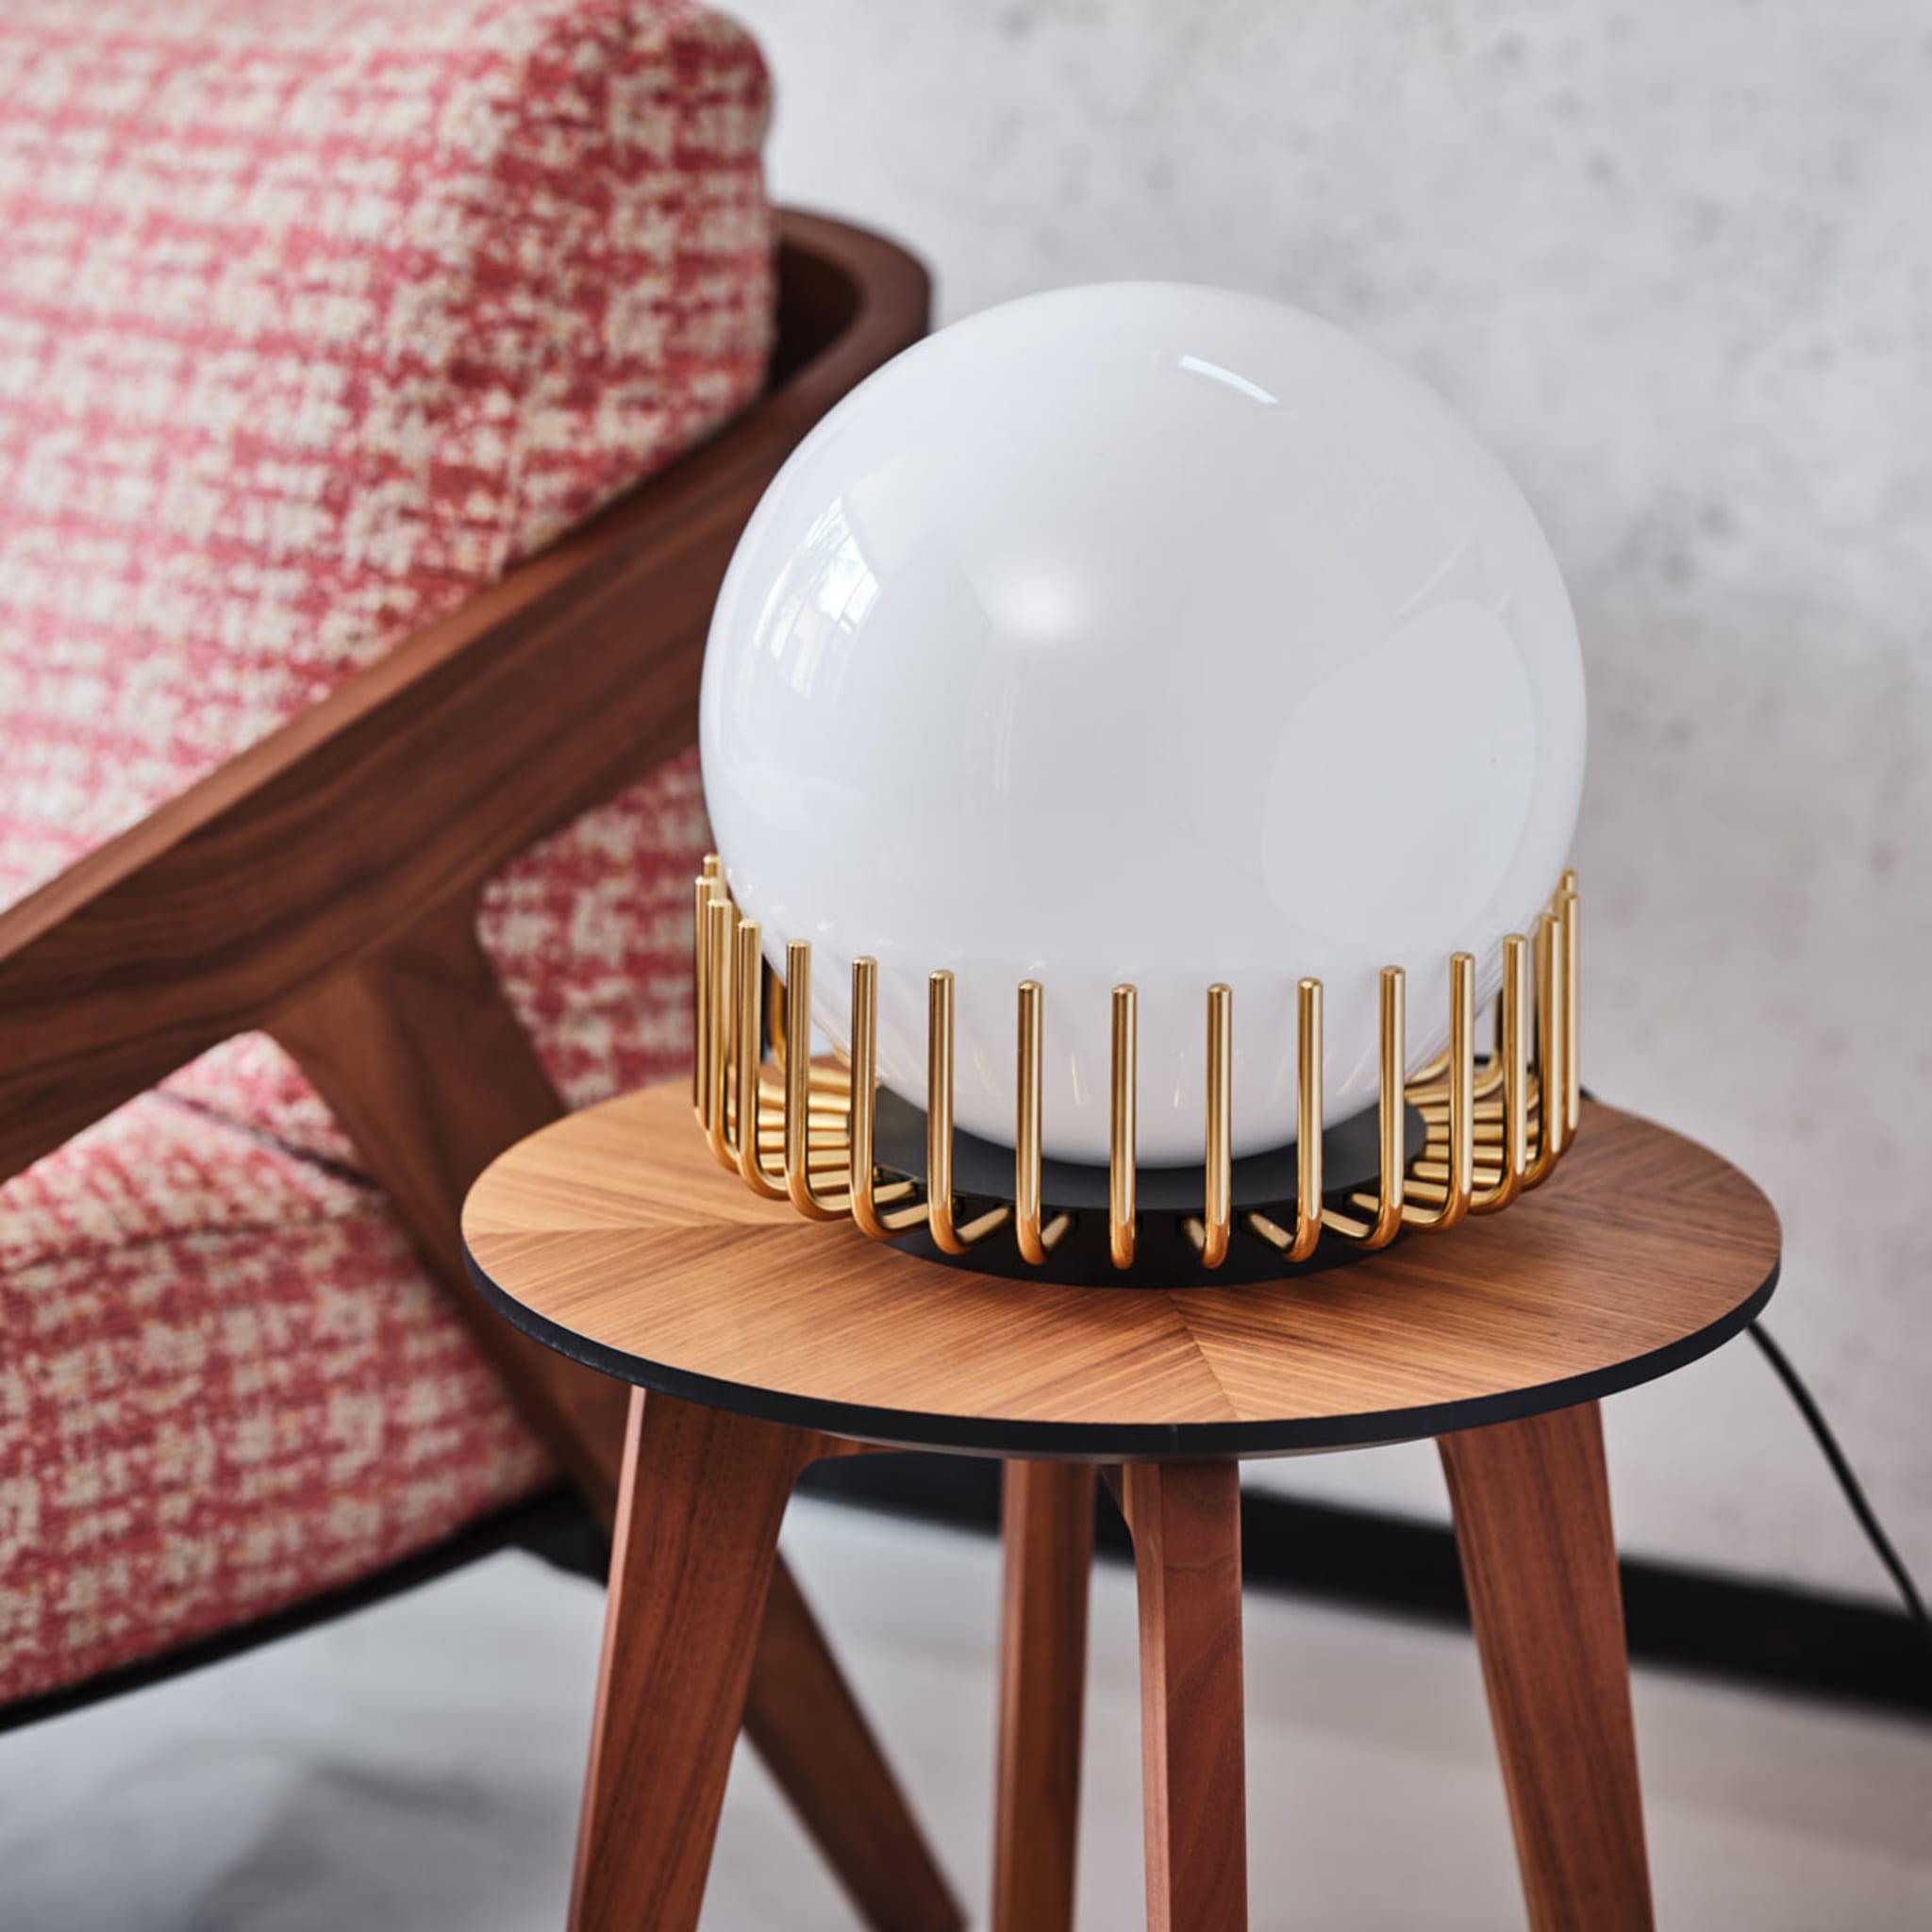 Lucy Mini Table Lamp - Alternative view 5